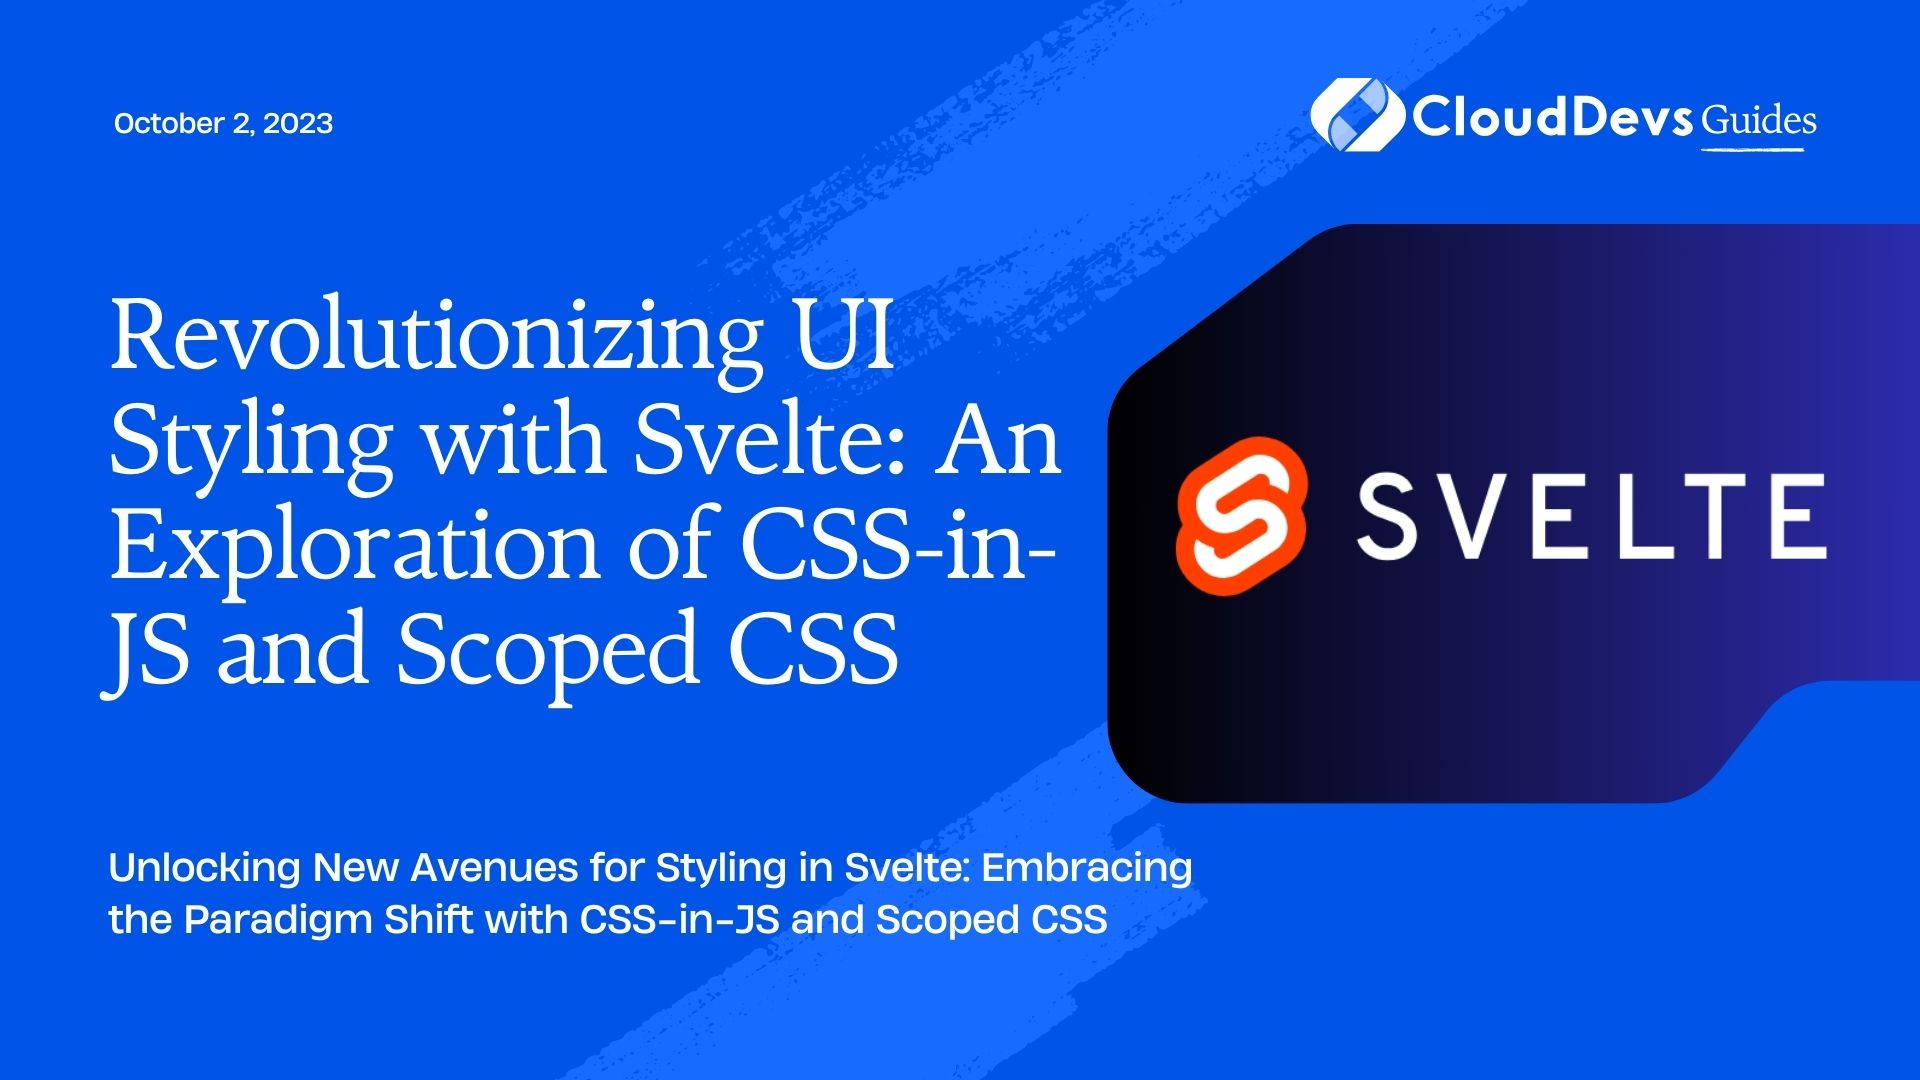 Revolutionizing UI Styling with Svelte: An Exploration of CSS-in-JS and Scoped CSS